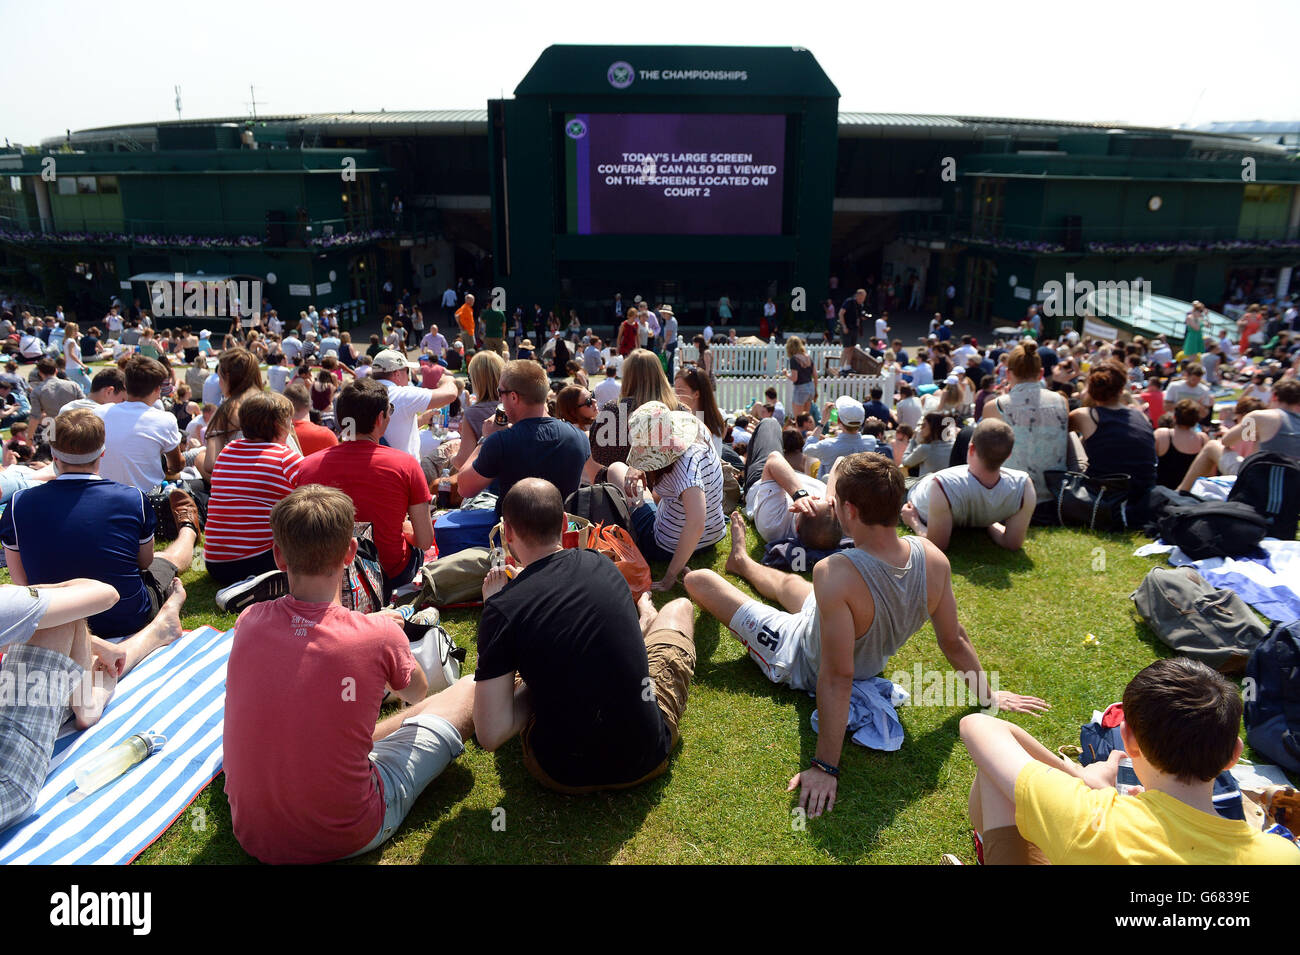 People take their place on Murray Mount after the gates are opened at the start of day eleven of the Wimbledon Championships at The All England Lawn Tennis and Croquet Club, Wimbledon. Stock Photo